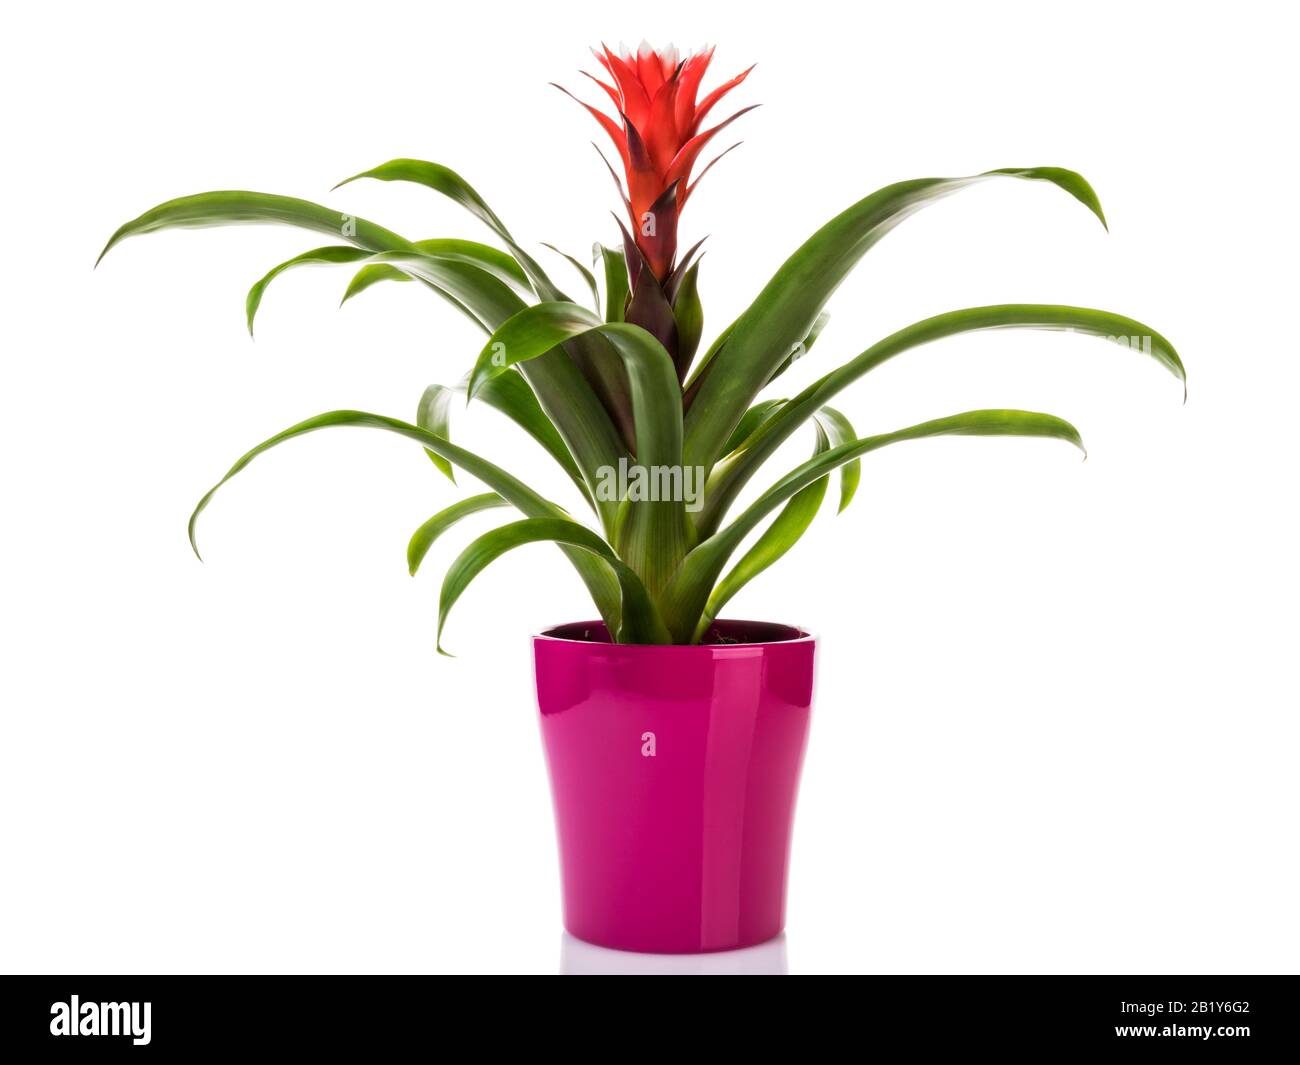 Potted red Guzmania Bromeliad in purple flower pot isolated on white background Stock Photo